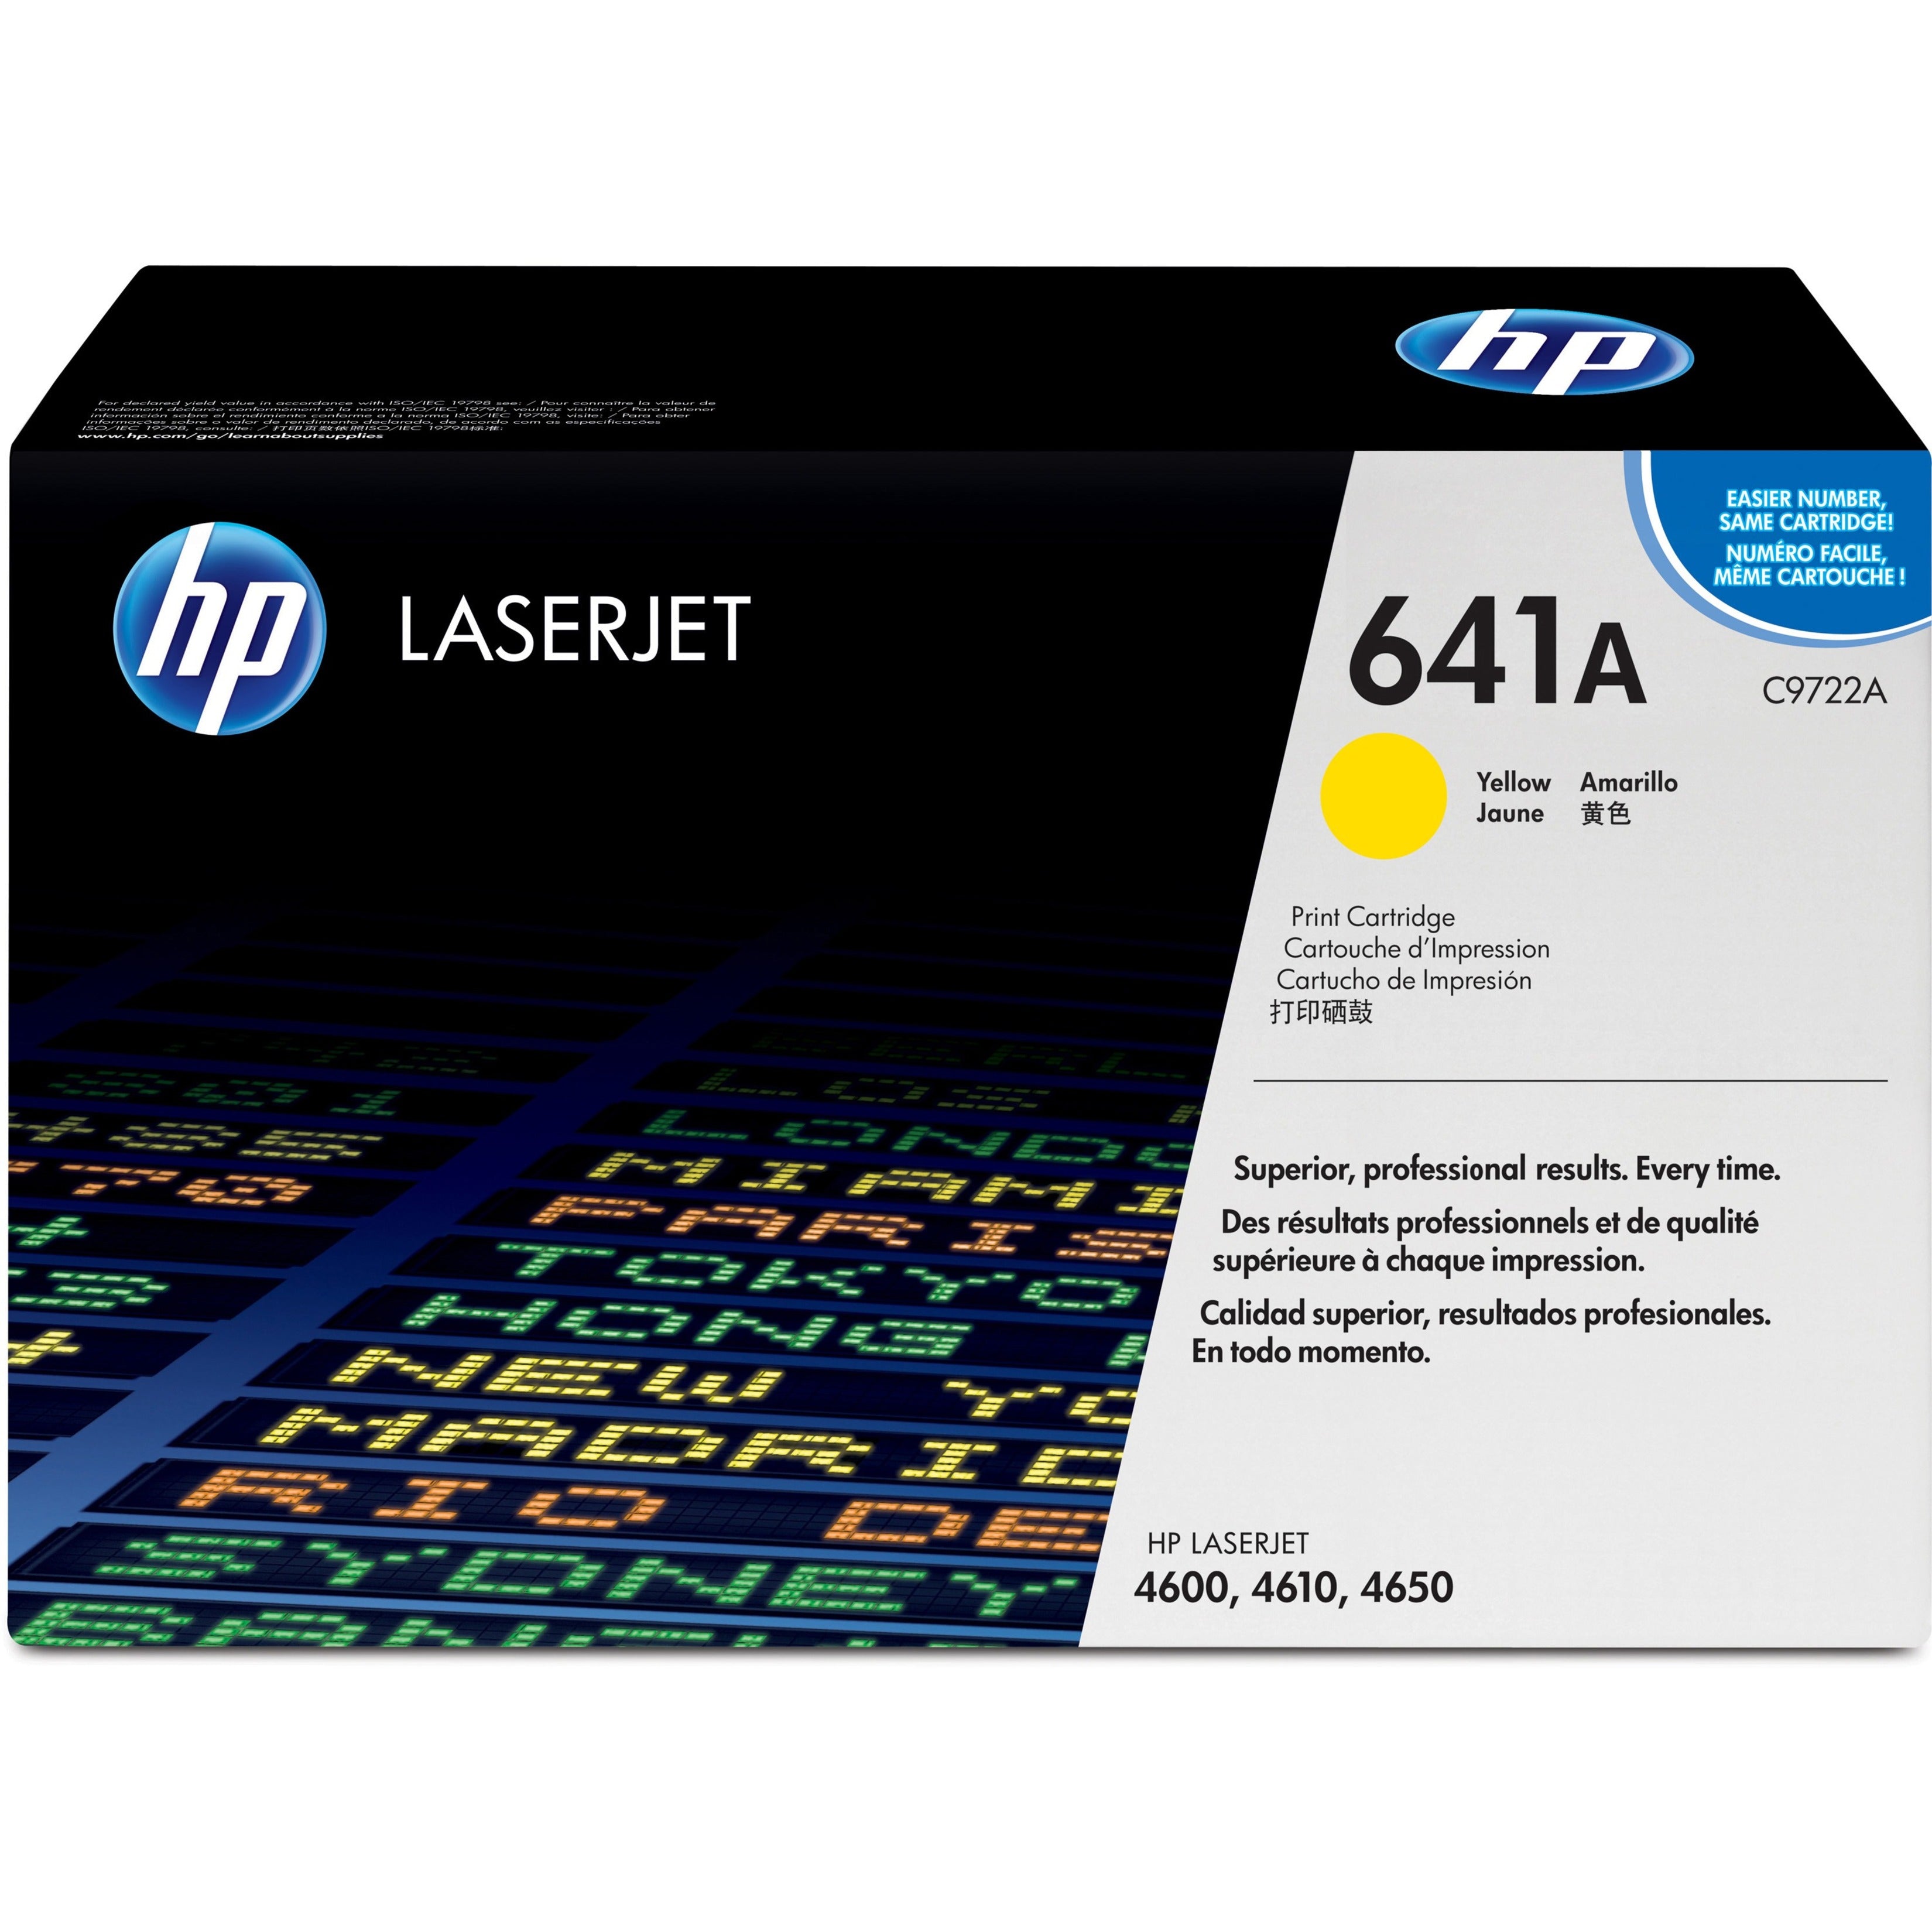 HP C9722A 641A Yellow Toner Cartridge, 8000 Page Yield